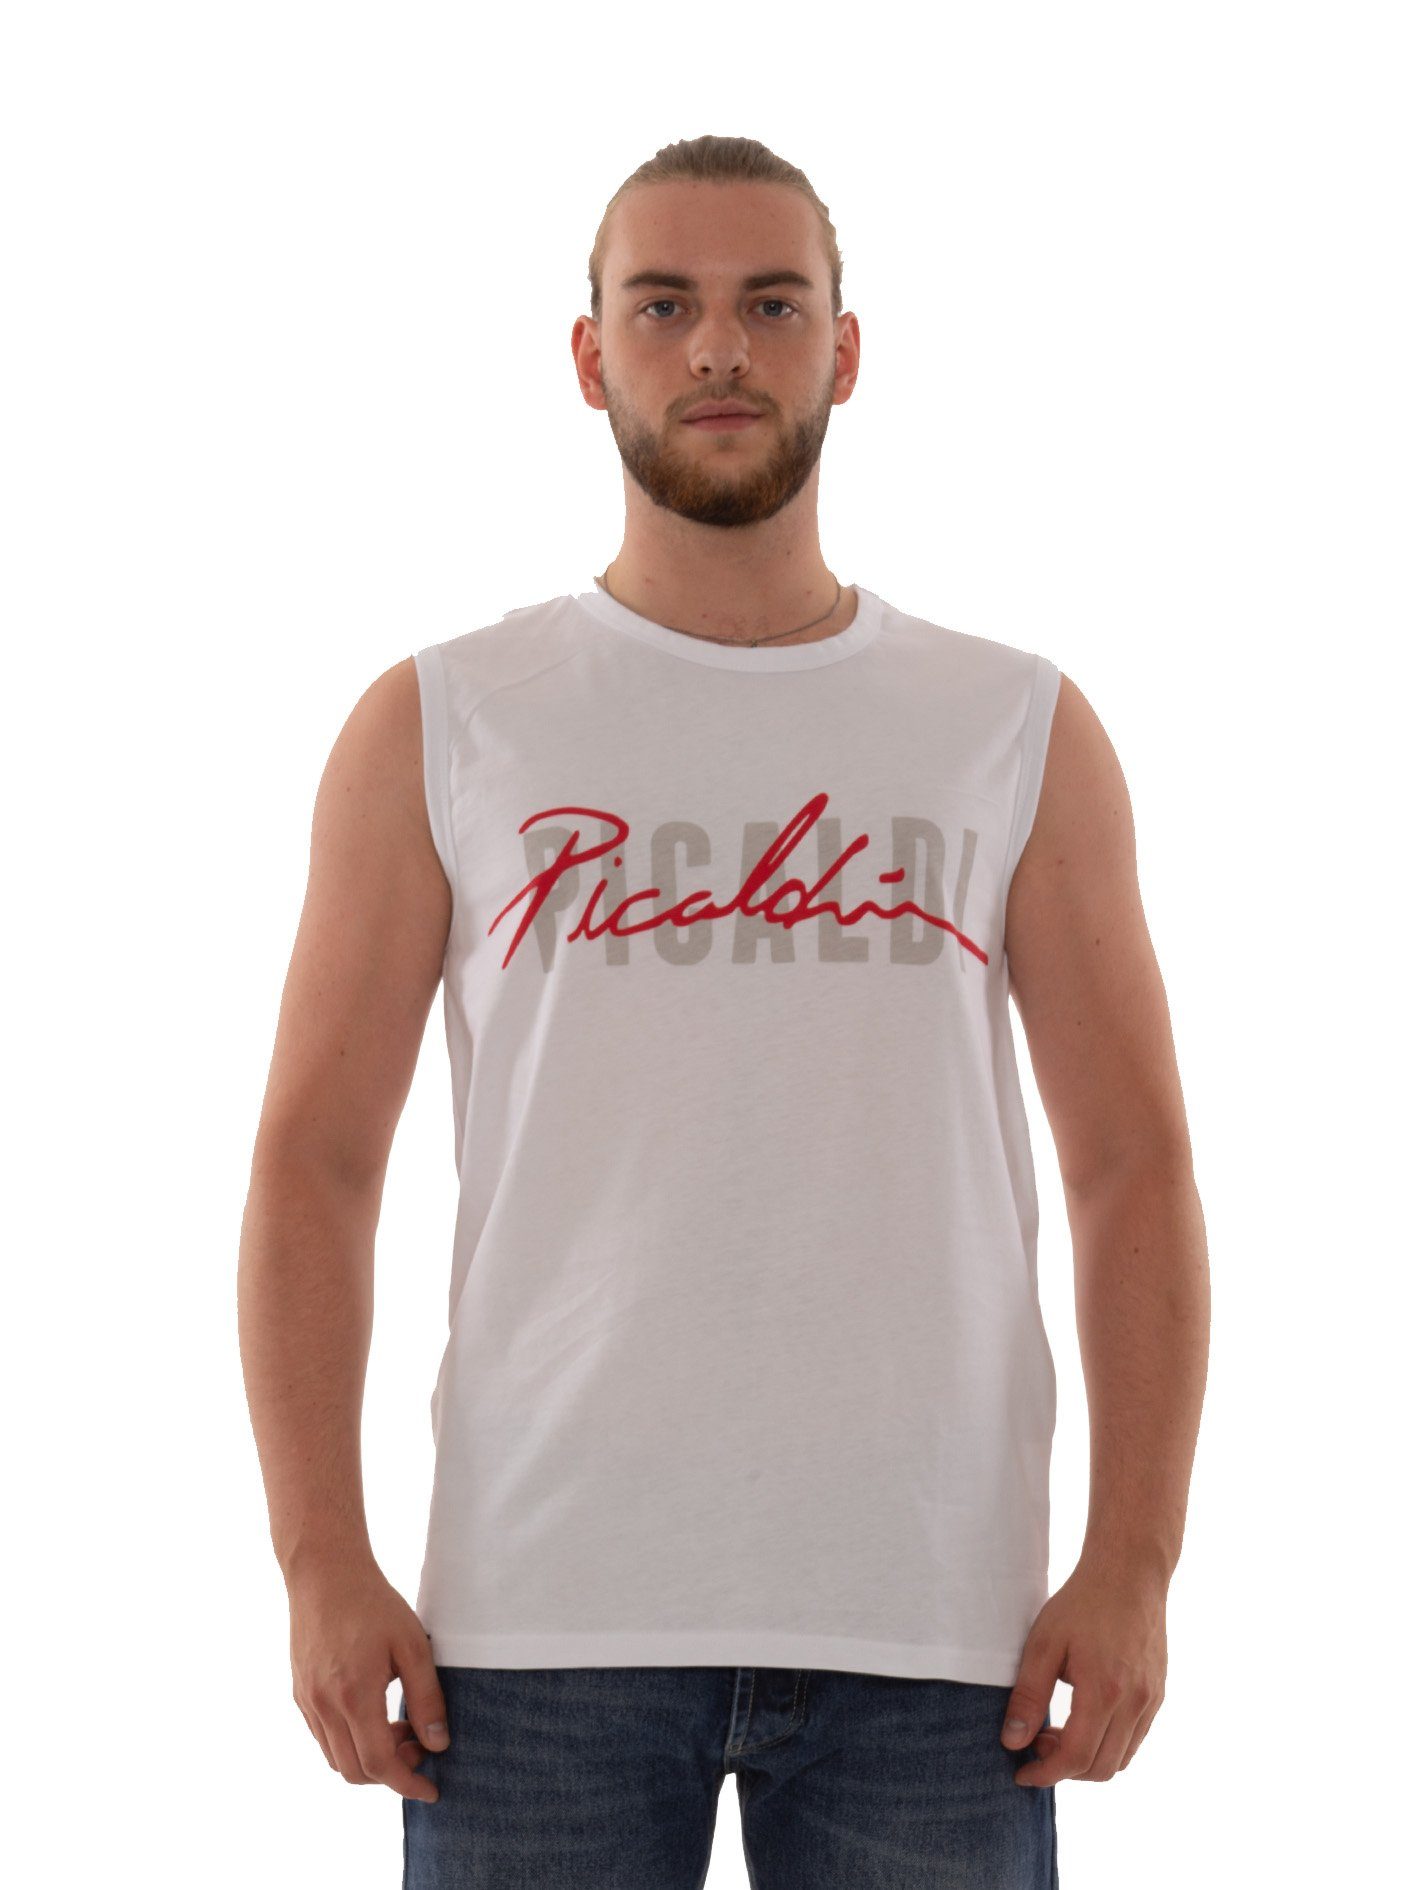 PICALDI Jeans Rundhalsausschnit Collection Print, White Muskelshirt